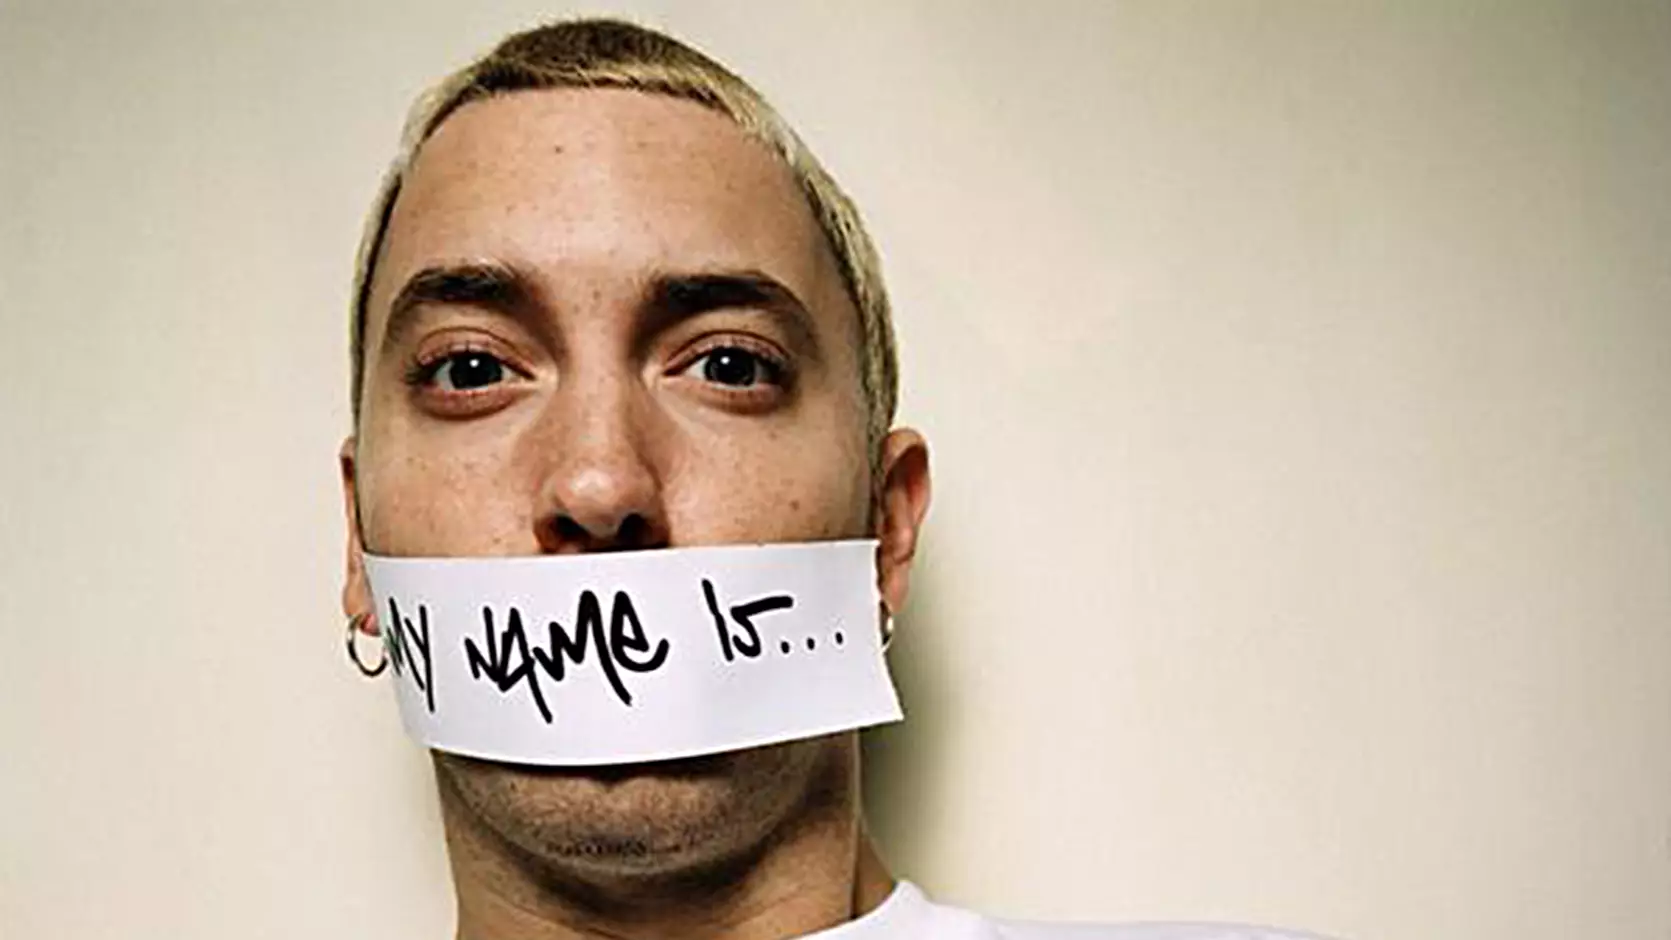 Someone Reimagined Eminem's My Name Is In 2021 And It Sounds Scarily Real